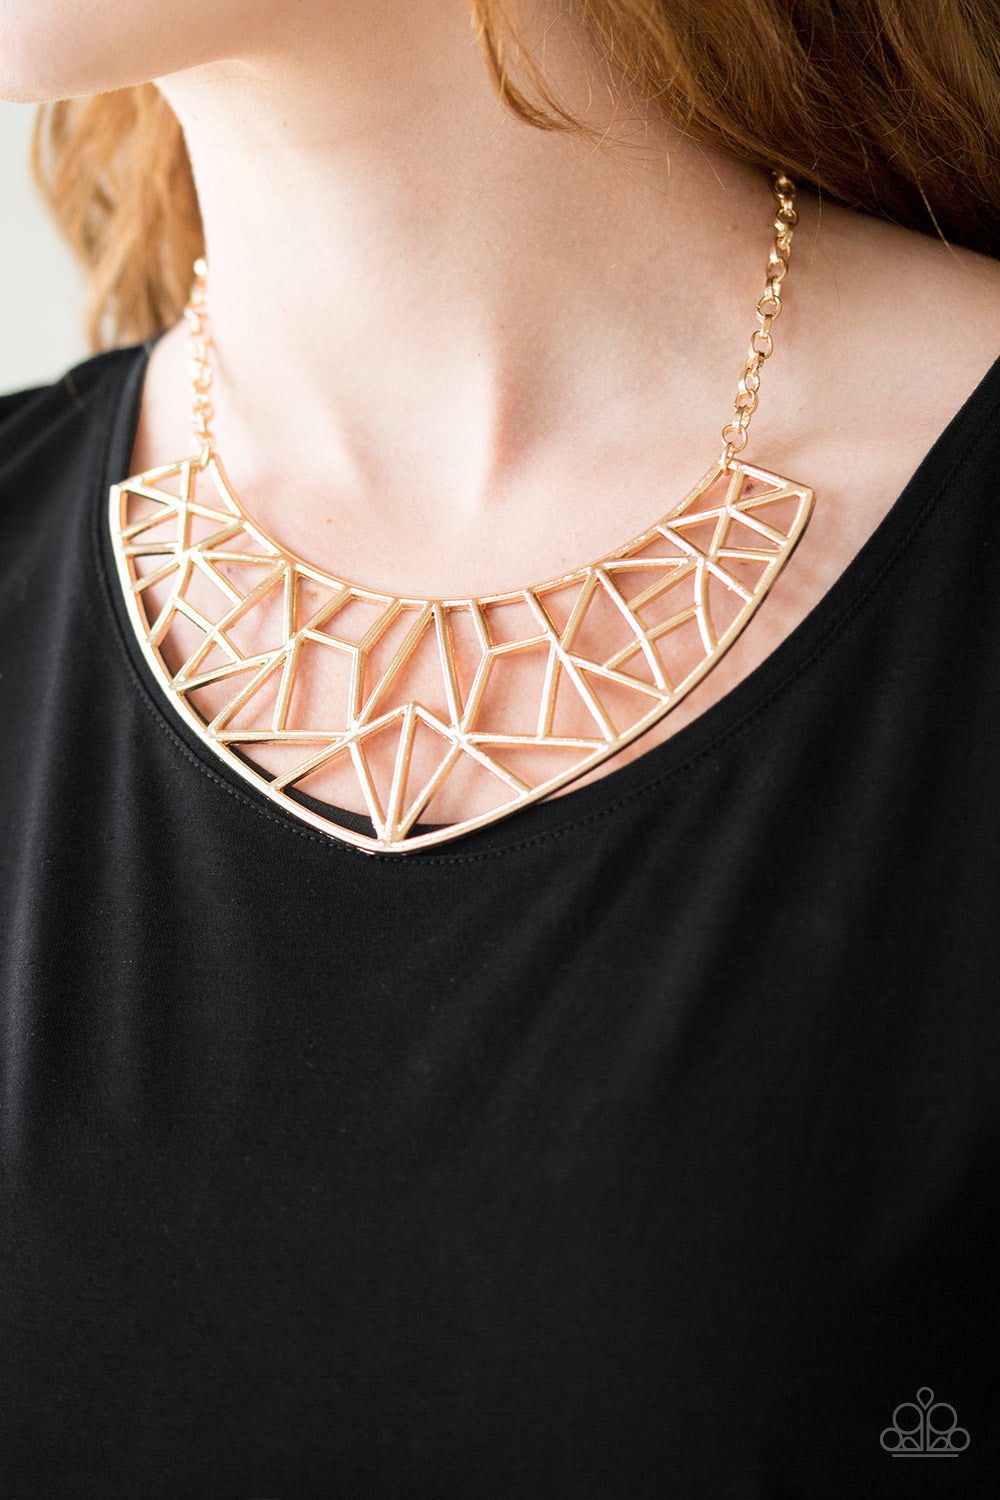 Strike While HAUTE - Gold necklace